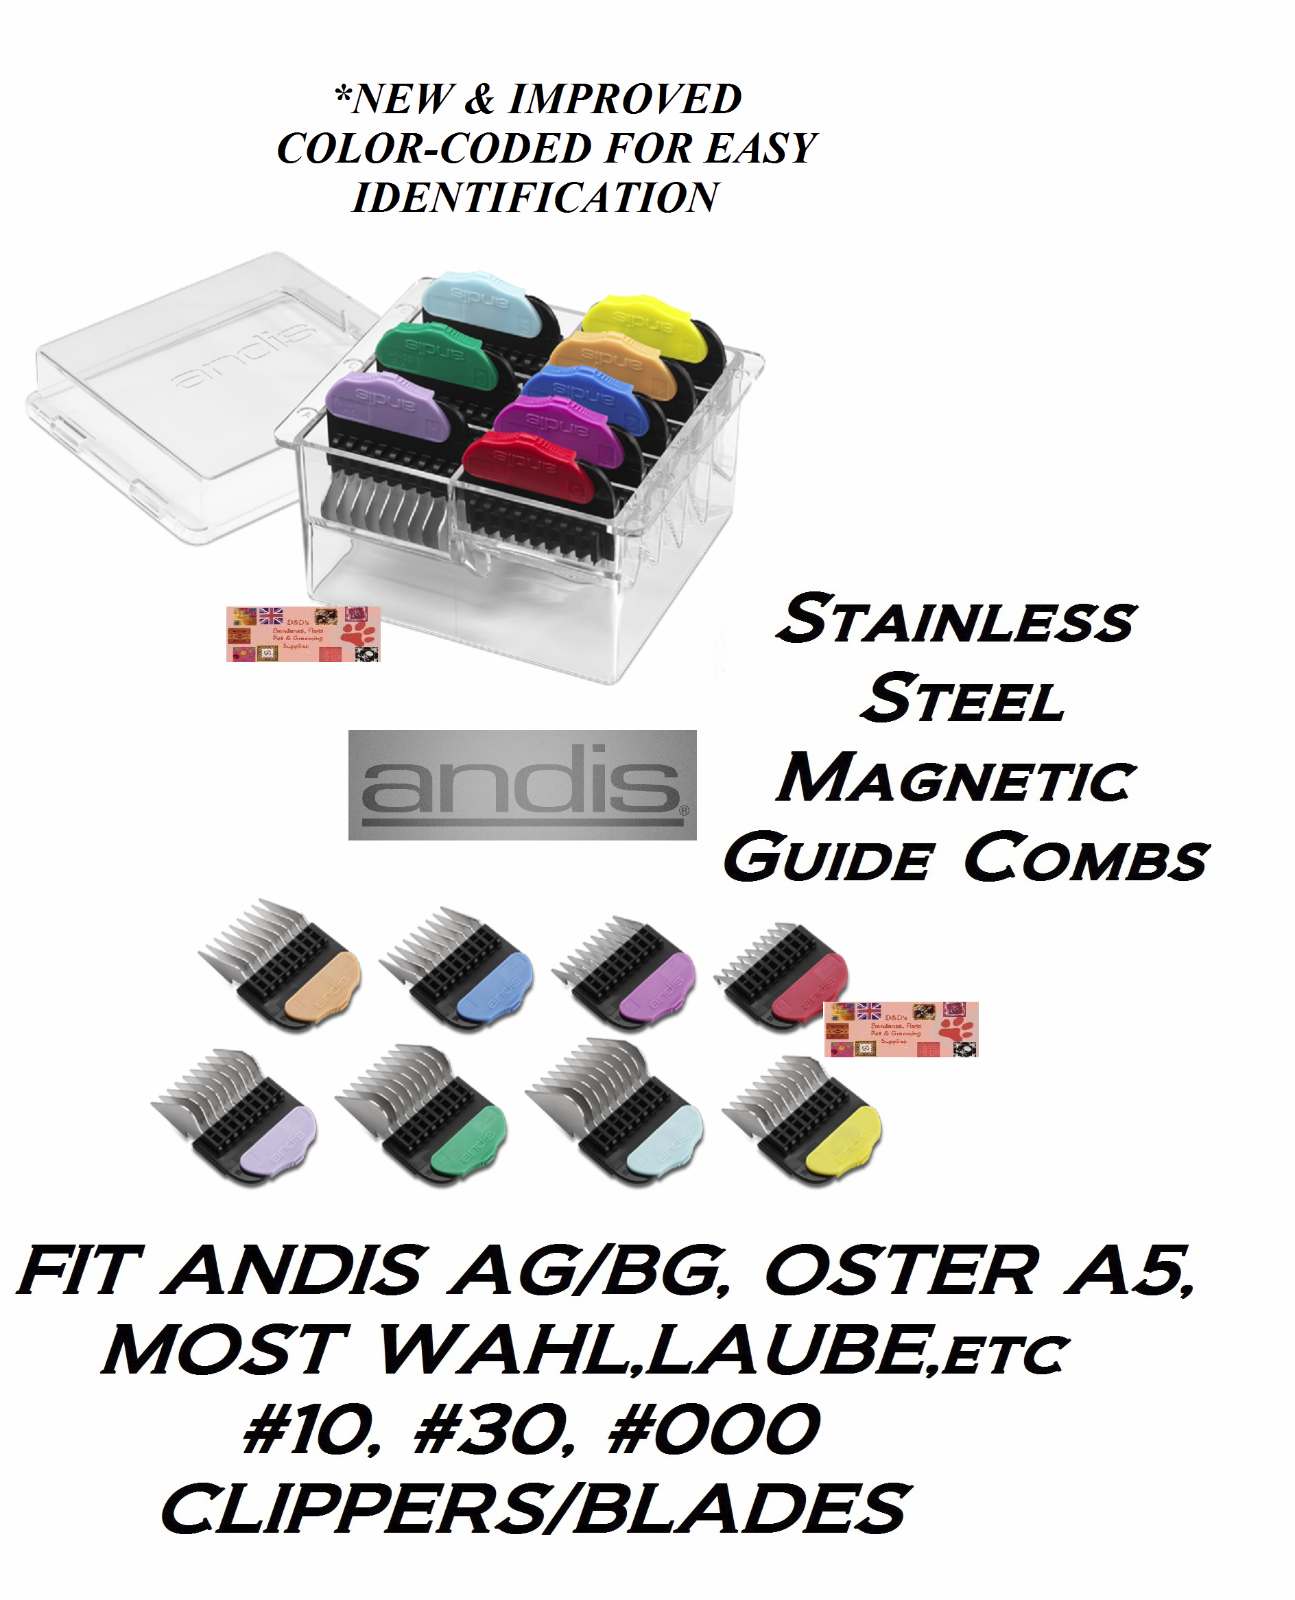 Andis Acier Inoxydable Magnétique Lame Pièce Jointe Guide Peigne Kit Coupe Oster - $76.63